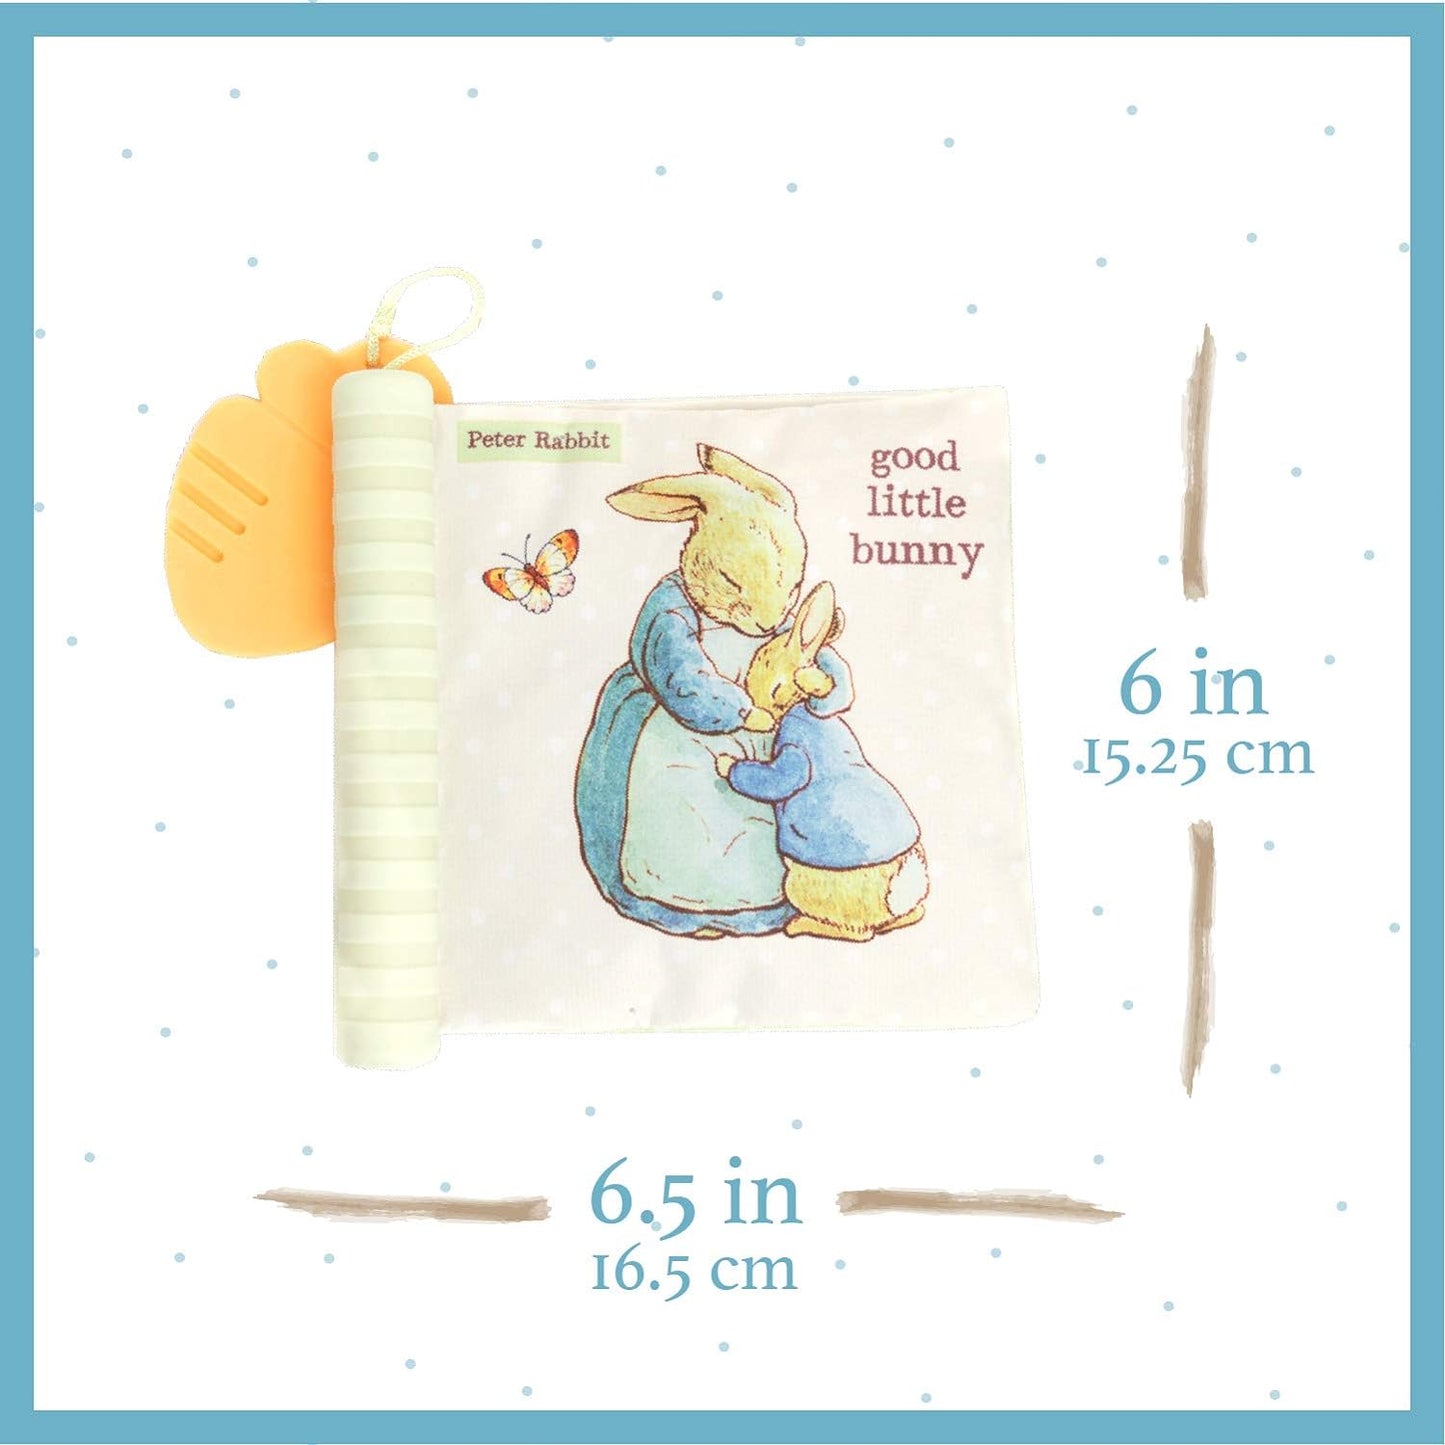 KIDS PREFERRED Beatrix Potter Peter Rabbit Soft Teether Book with Sensory Teether Spine and Teether Toy